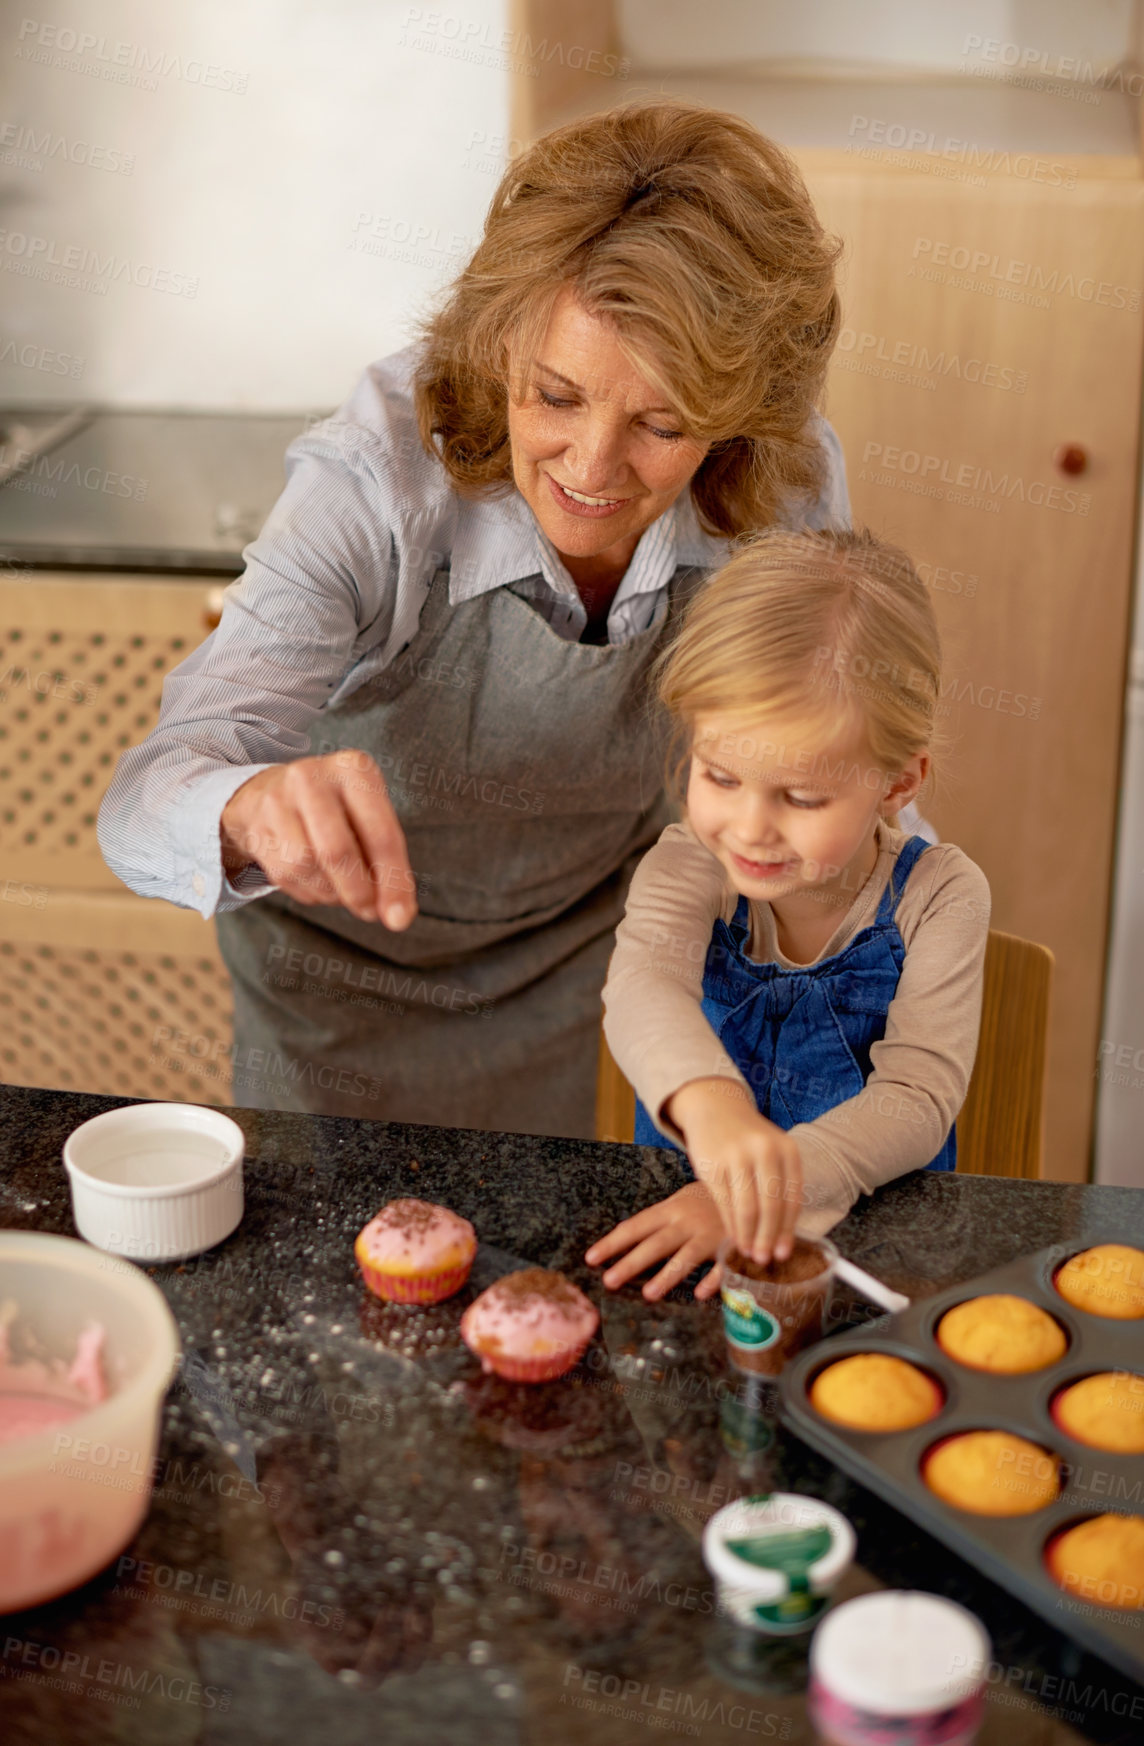 Buy stock photo Grandmother, child and baking cupcakes or sprinkles with icing decorations or learning creativity, bonding or teamwork. Female person, girl and sweet treats or teaching with ingredients, snack or fun